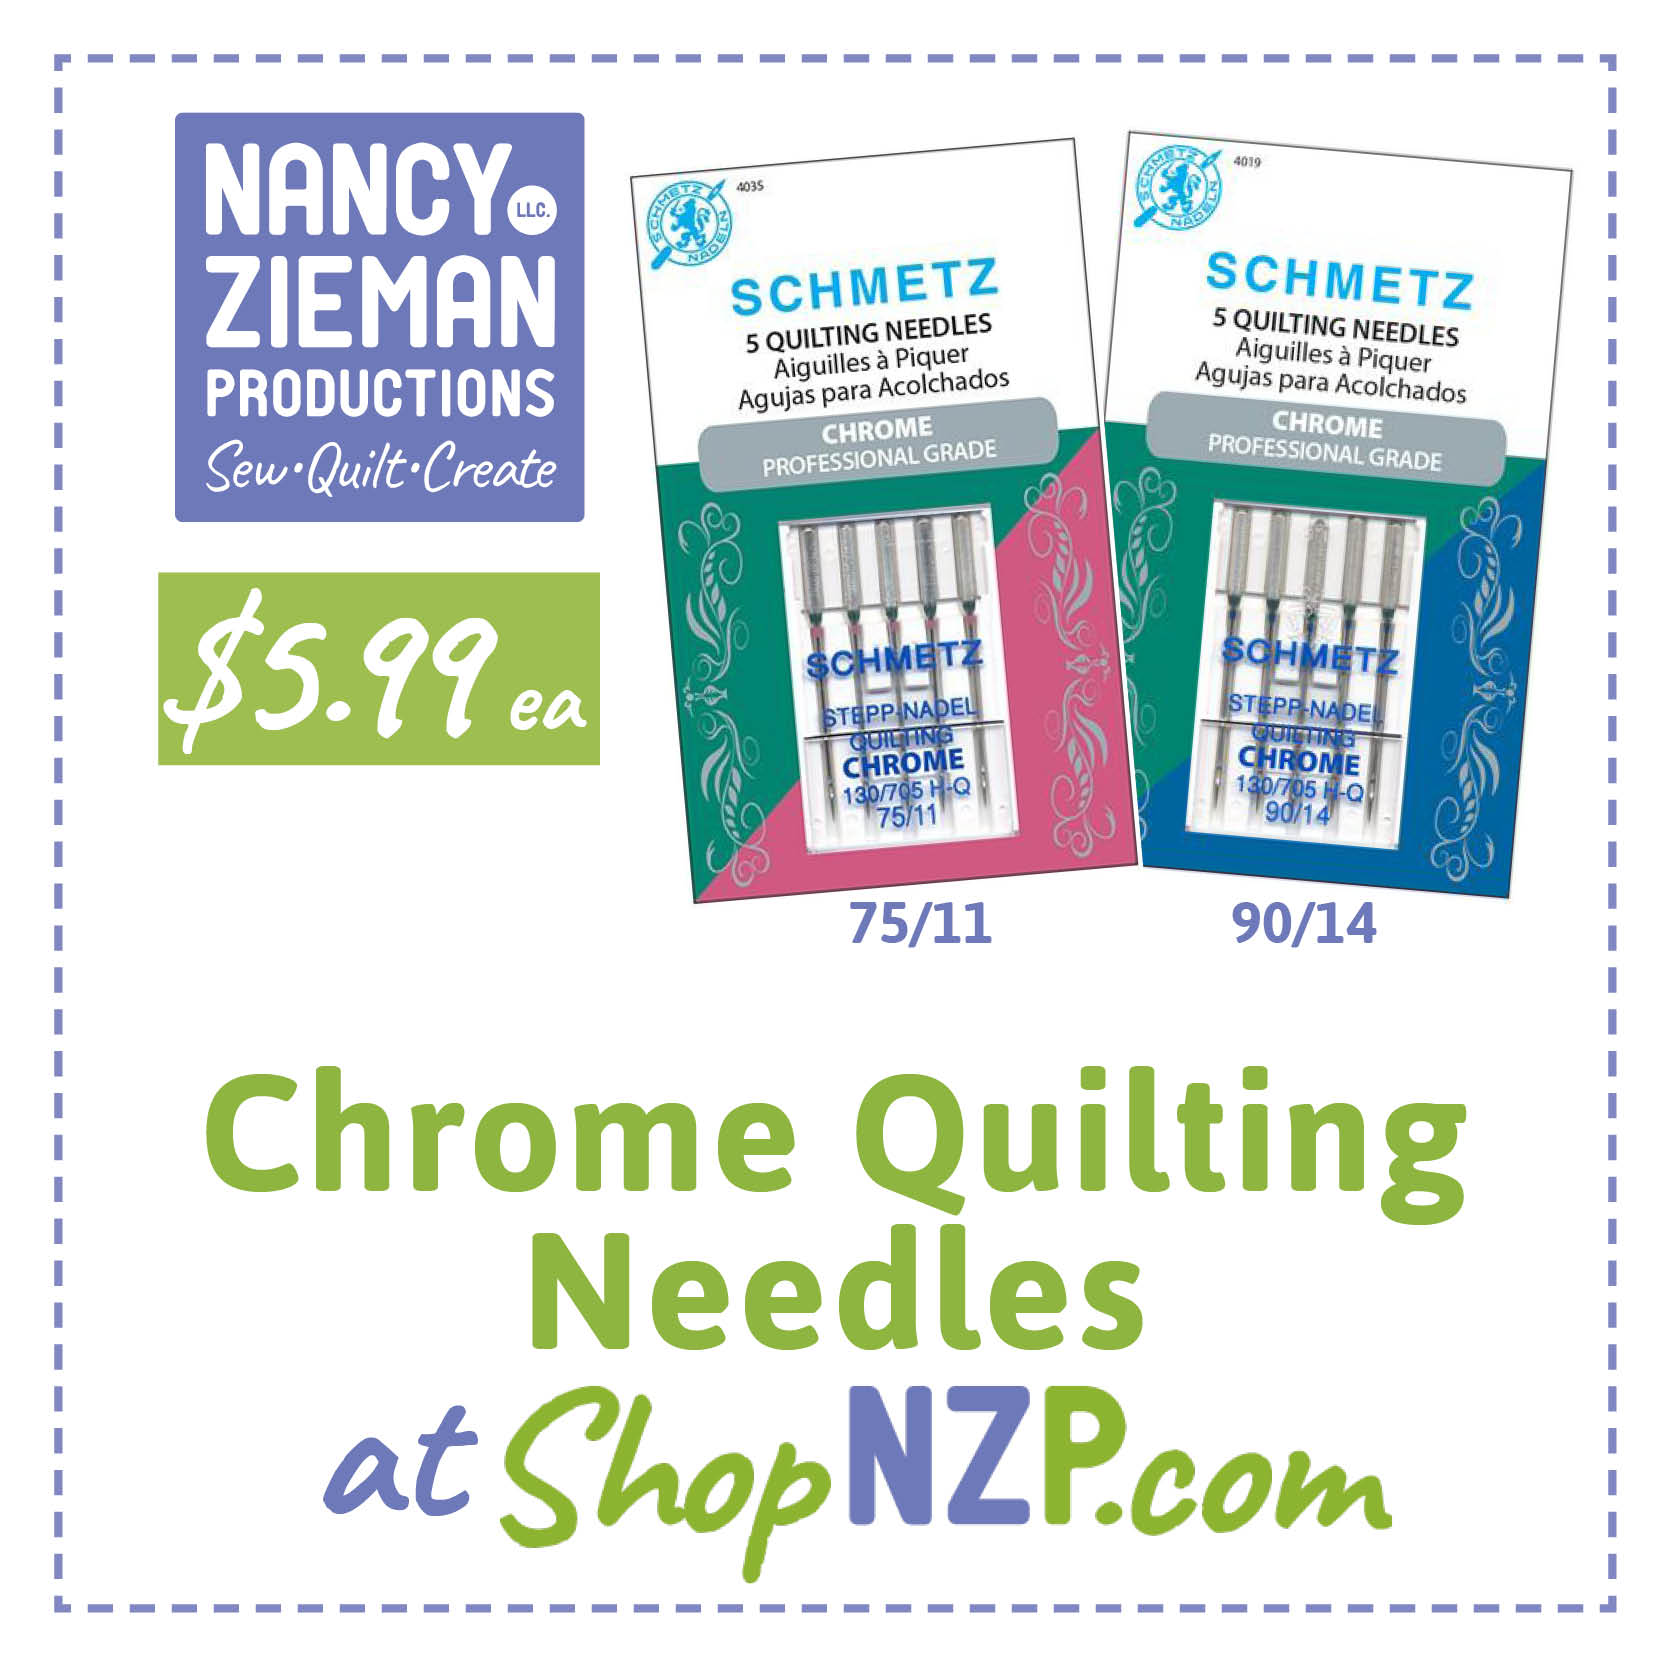 Schmetz Chrome Quilting Needles available at ShopNZP.com